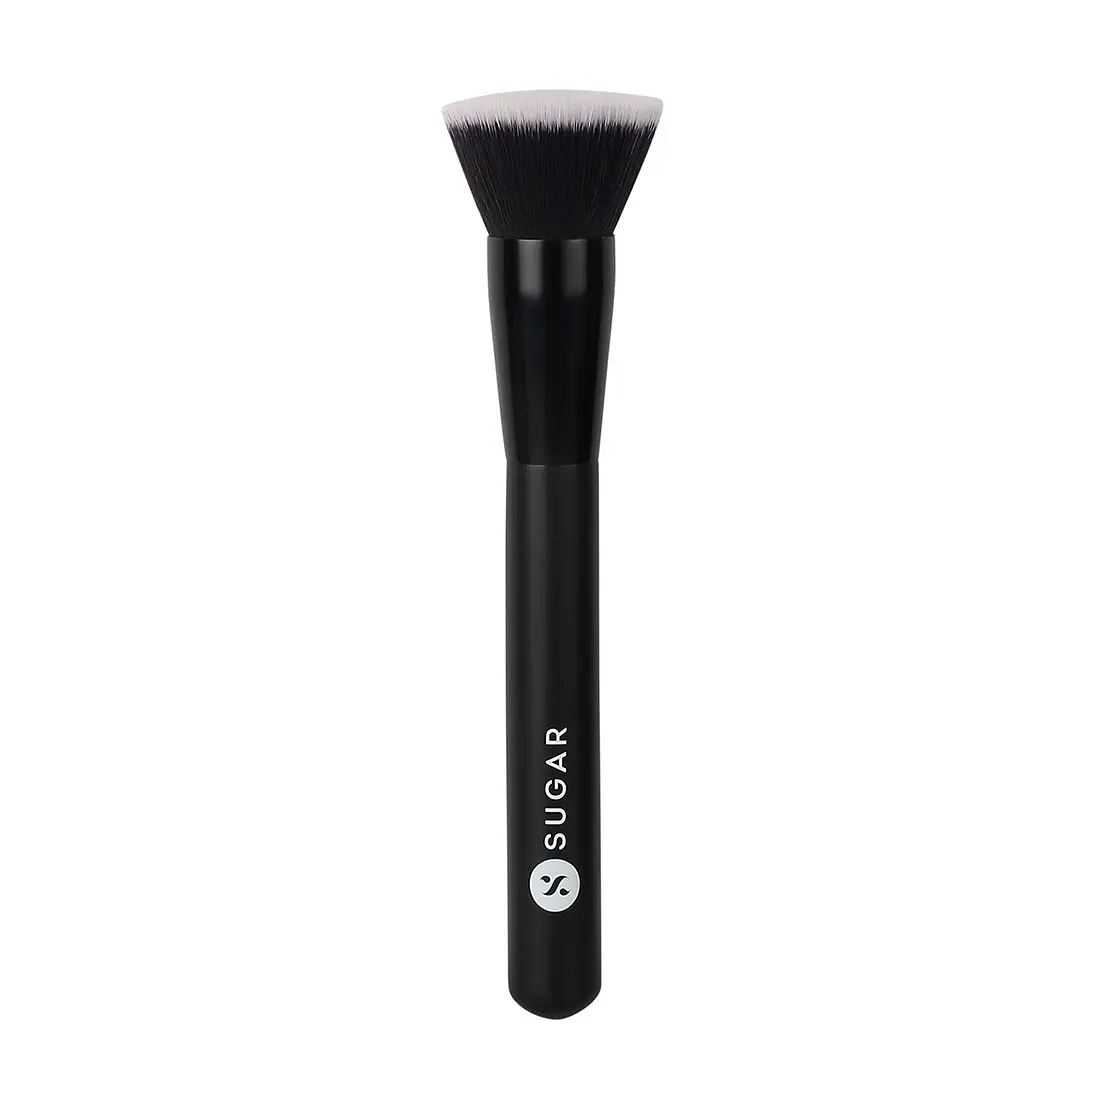 SUGAR Cosmetics - Blend Trend - 052 Kabuki (Brush For Foundation) - Soft, Synthetic Bristles and Wooden Handle